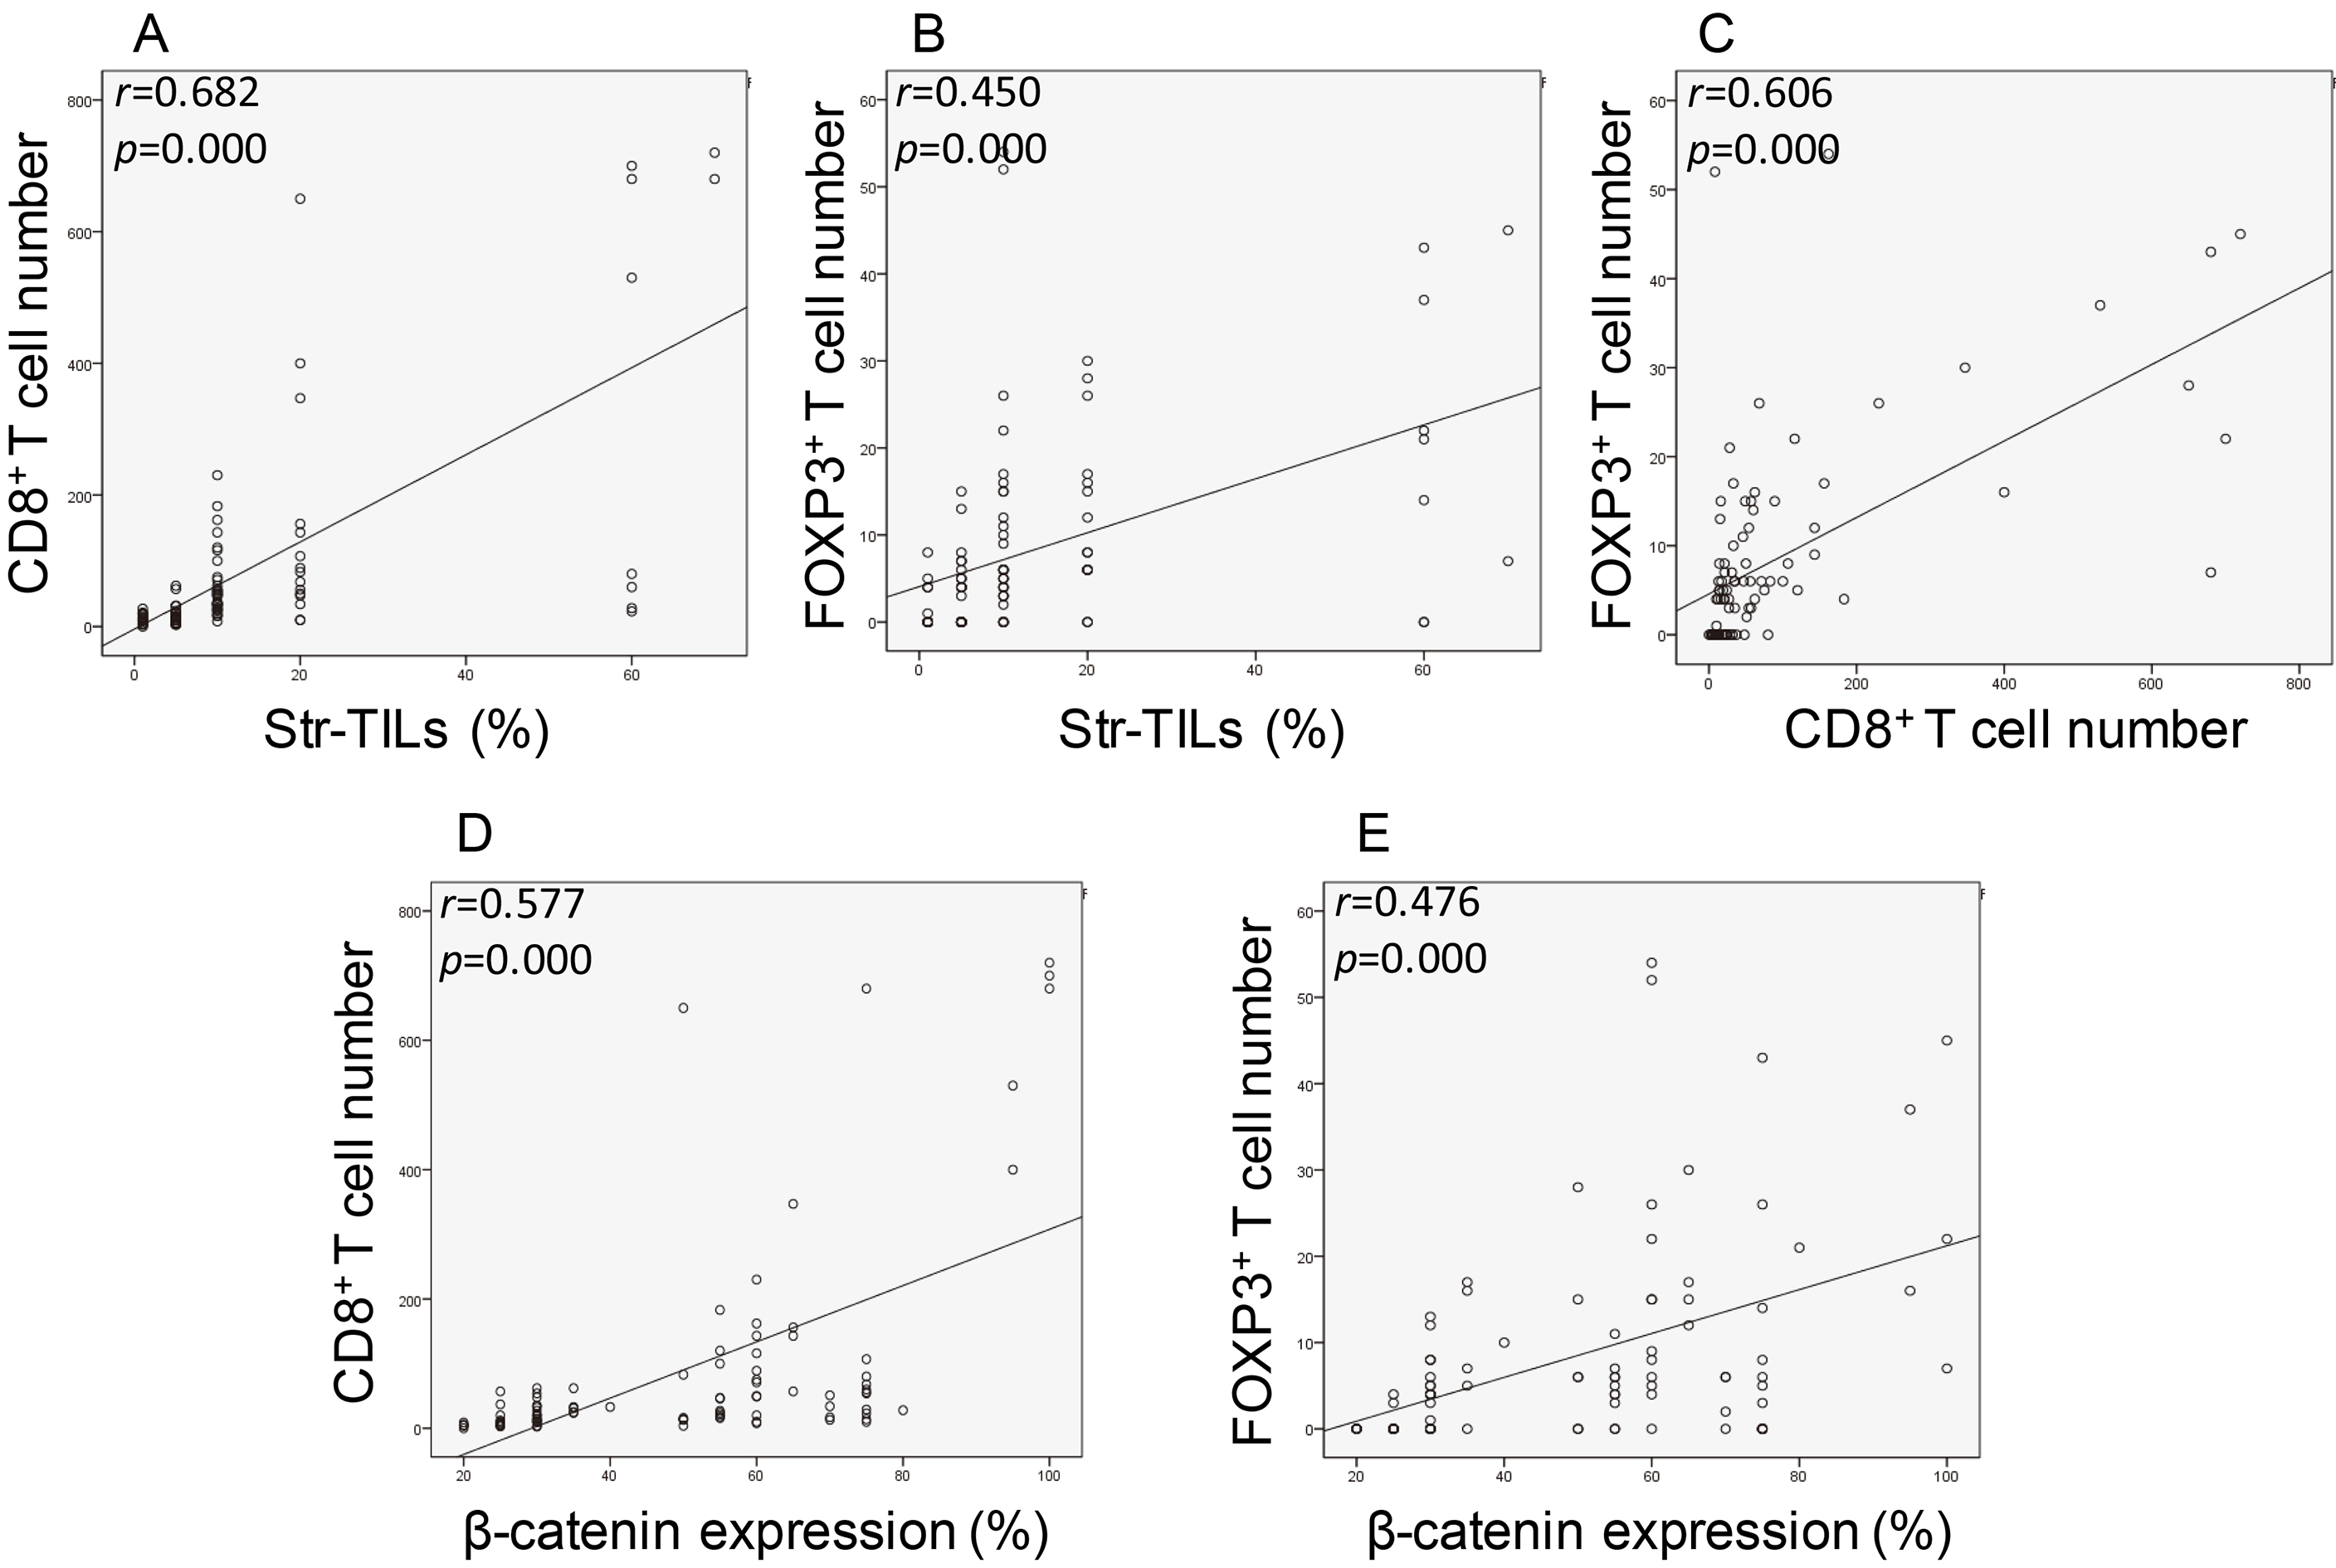 Association of TIL subsets infiltration with β-catenin expression in breast cancer. Correlation of stroma TILs with CD8+ T cells (A) or FOXP3+ T cell (B) infiltration; correlation between CD8+ T cells and FOXP3+ T cell infiltration (C) and the correlation of β-catenin expression with CD8+ T cells (D) or FOXP3+ T cell (E) were analyzed by Pearson Correlation test. 